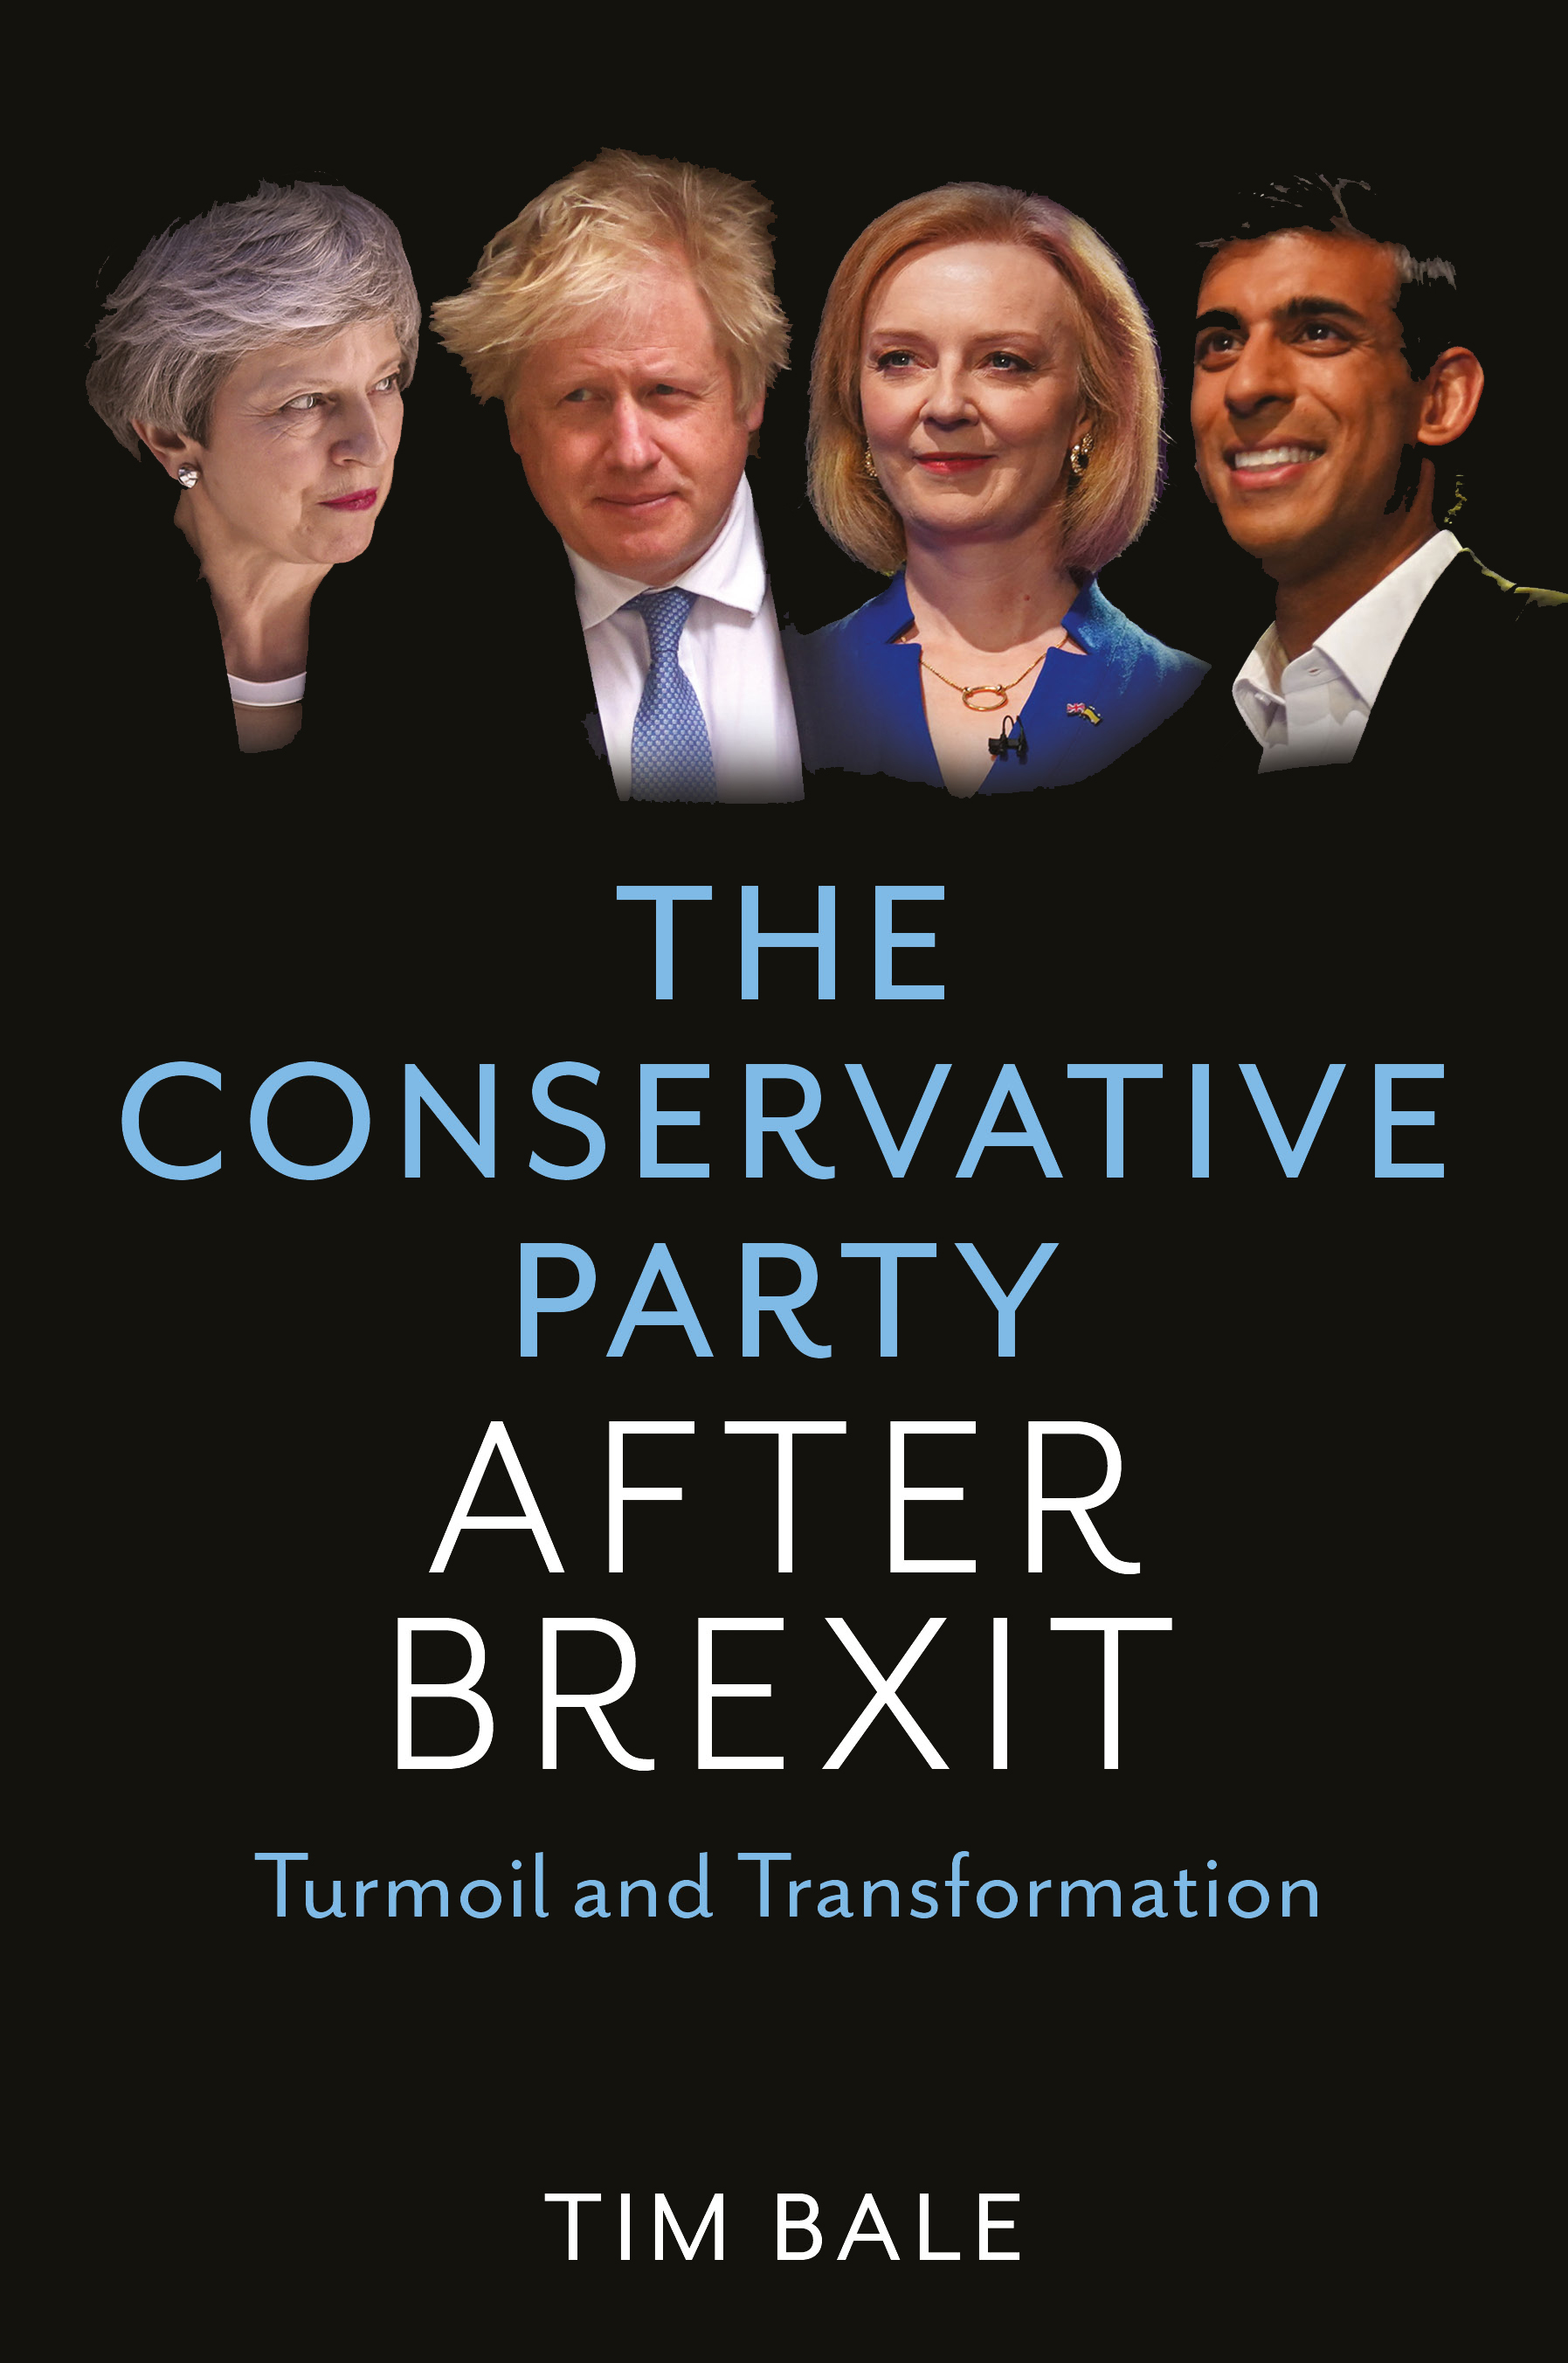 Cover of Tim Bale's new book, The Conservative Party After Brexit. It shows Theresa May, Boris Johnson, Liz Truss and Rishi Sunak against a black background above the title text.